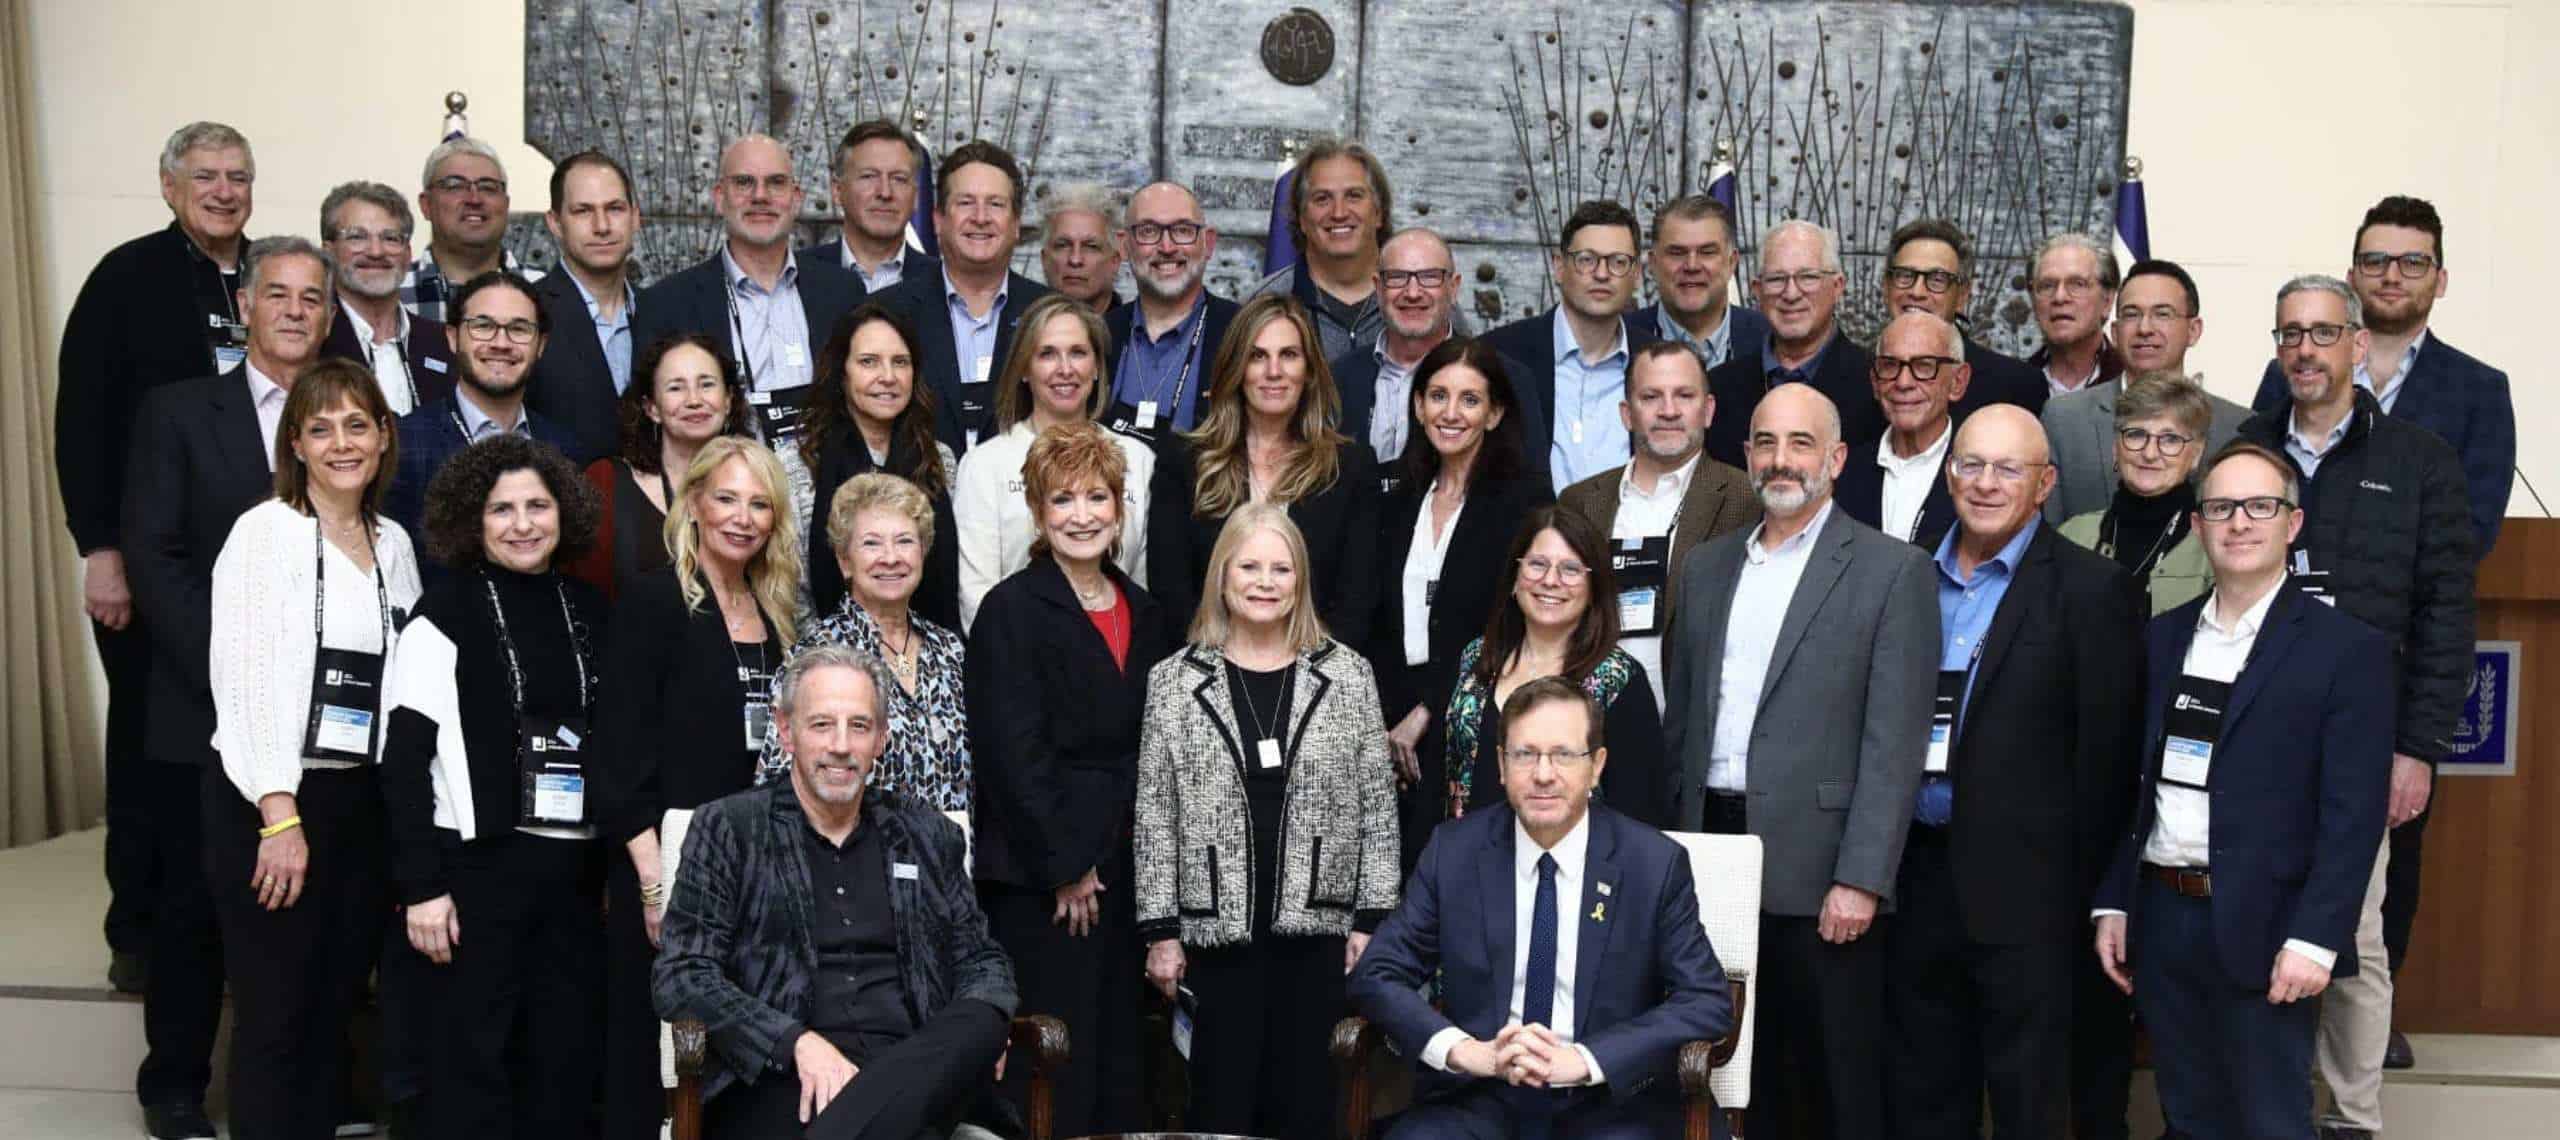 30+ leaders representing JCCs and Jewish communities throughout North America on a four-day Solidarity Mission led by the JCC Association of North America and Ministry of Diaspora Affairs.  